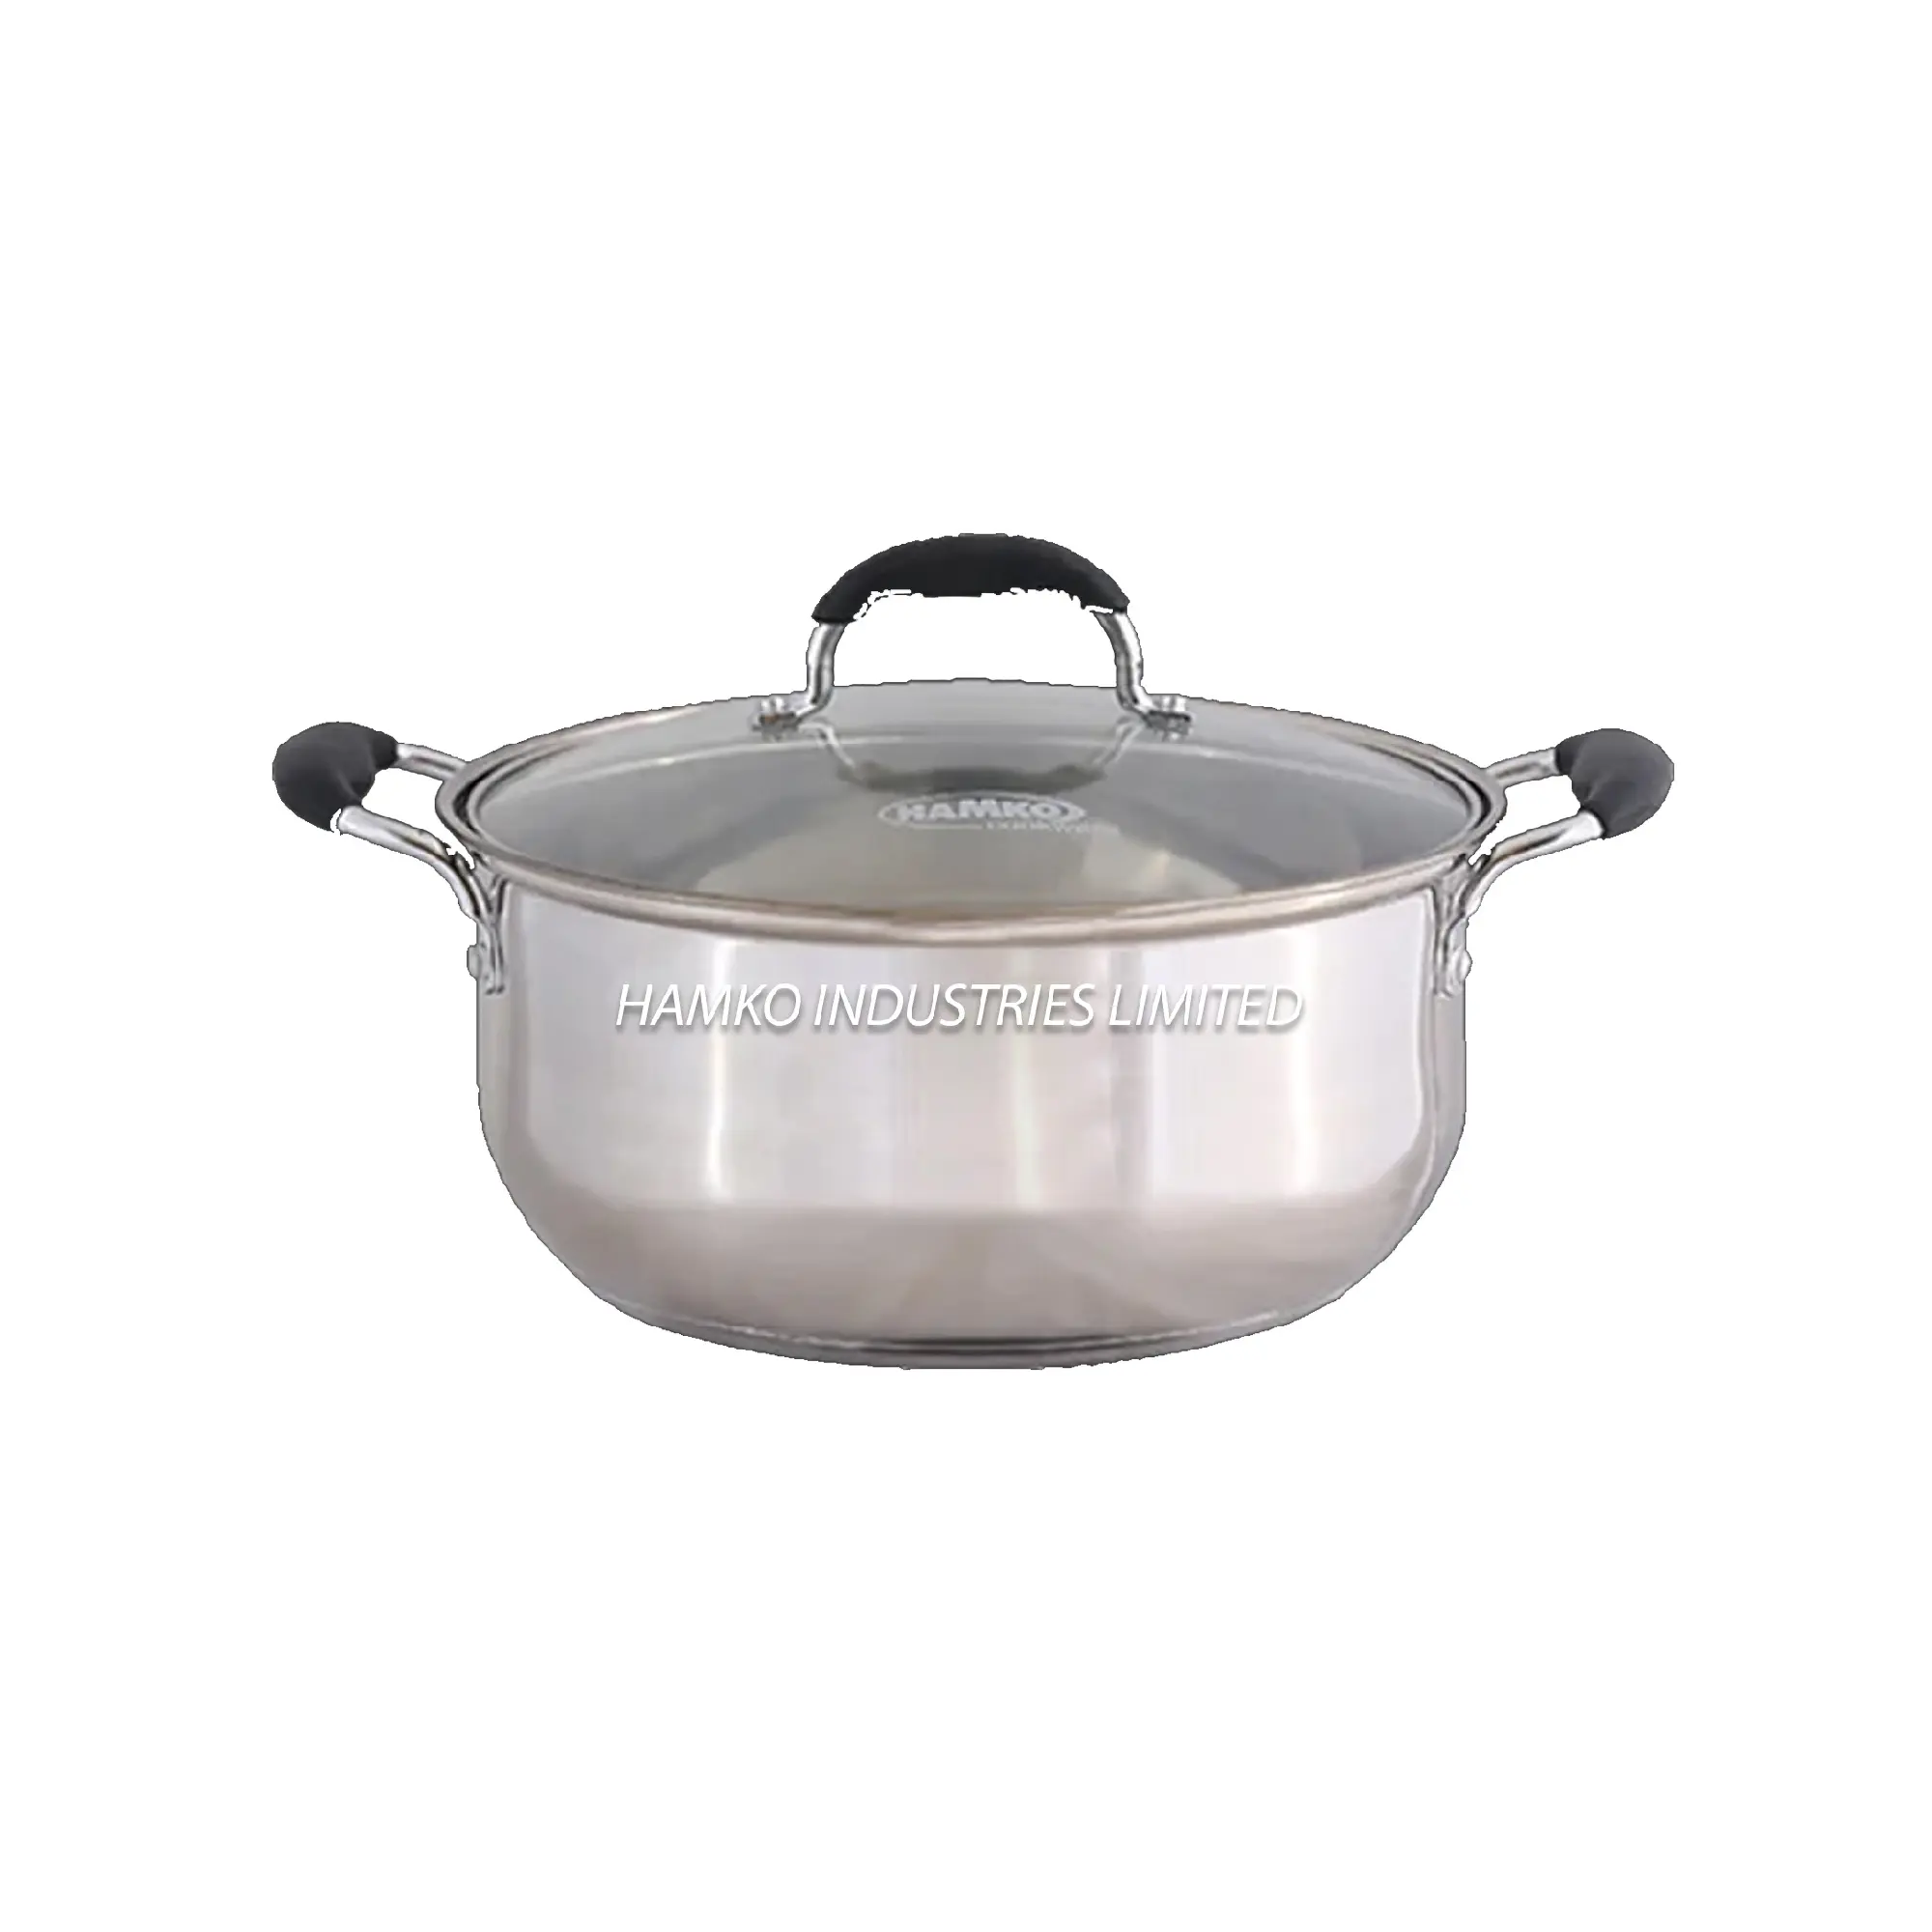 Export Oriented Factory Direct Price Cookware Household Wholesale Custom Stainless Steel Oval Sauce Pan 22 cm From Bangladesh